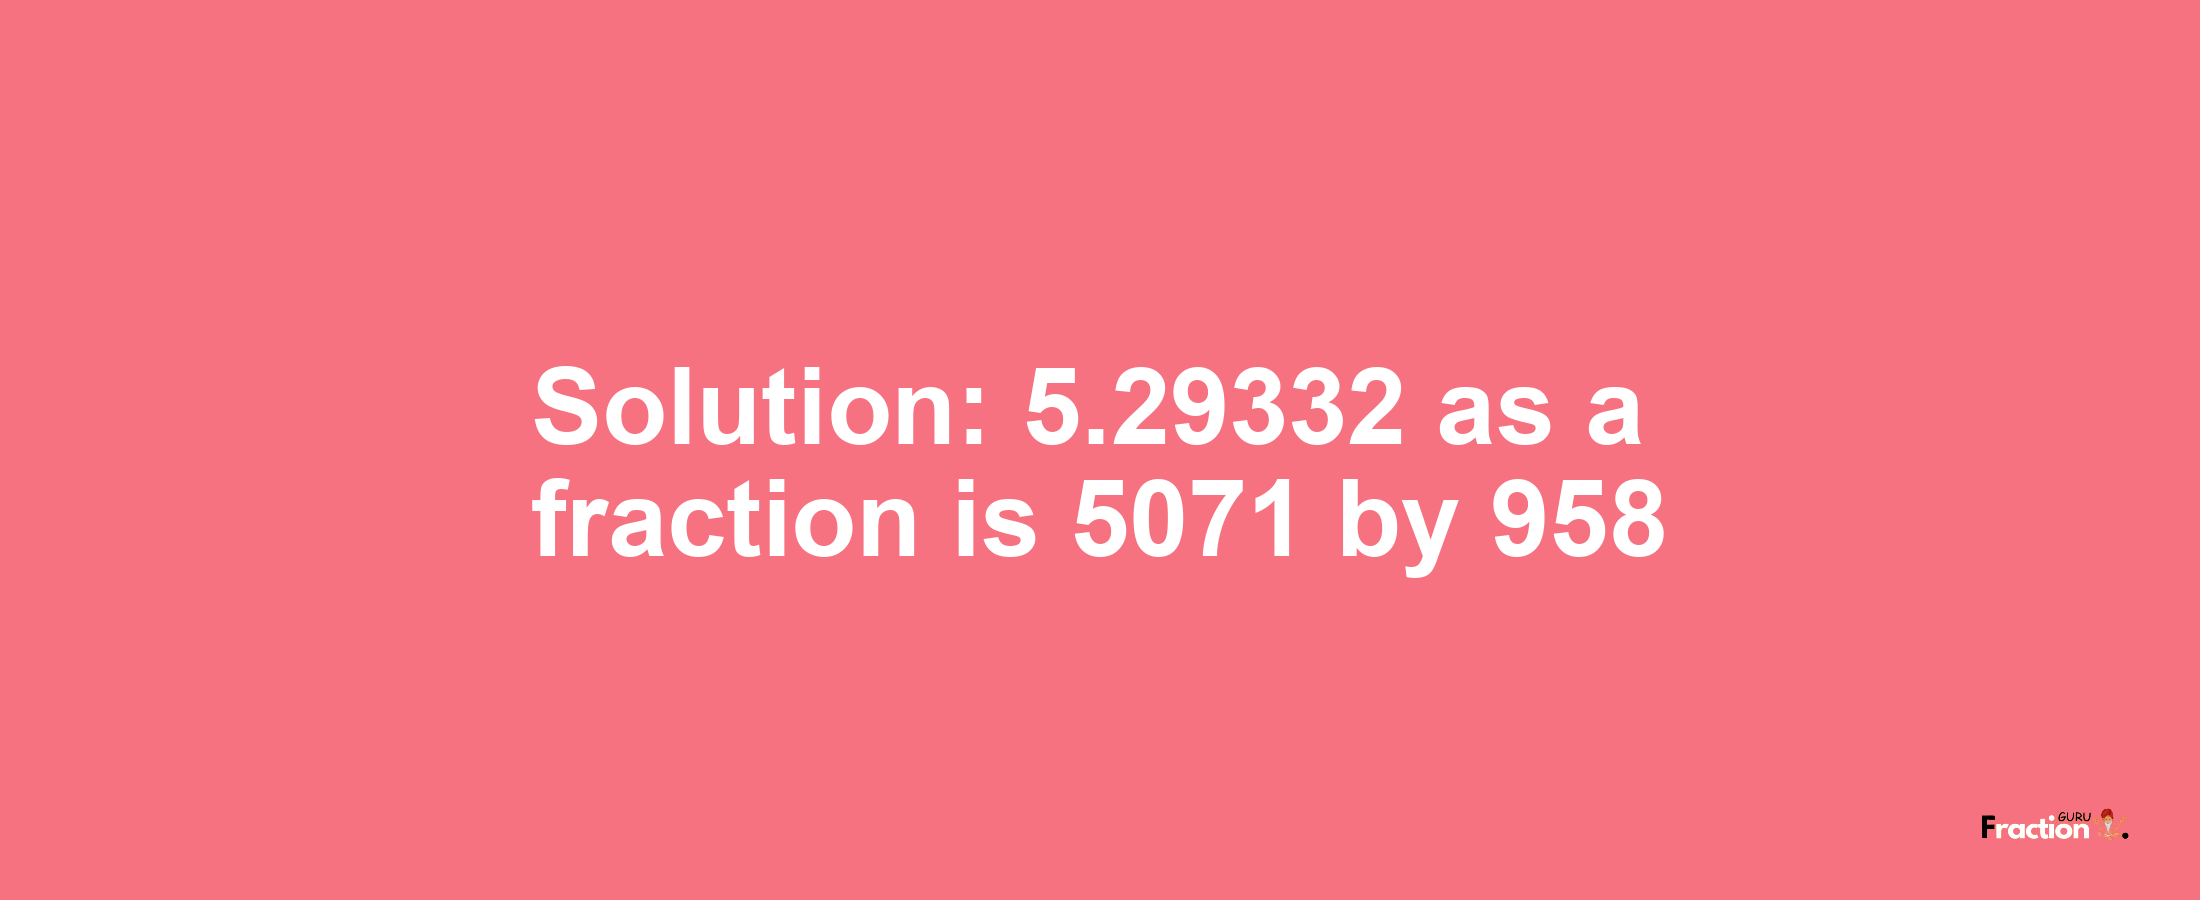 Solution:5.29332 as a fraction is 5071/958